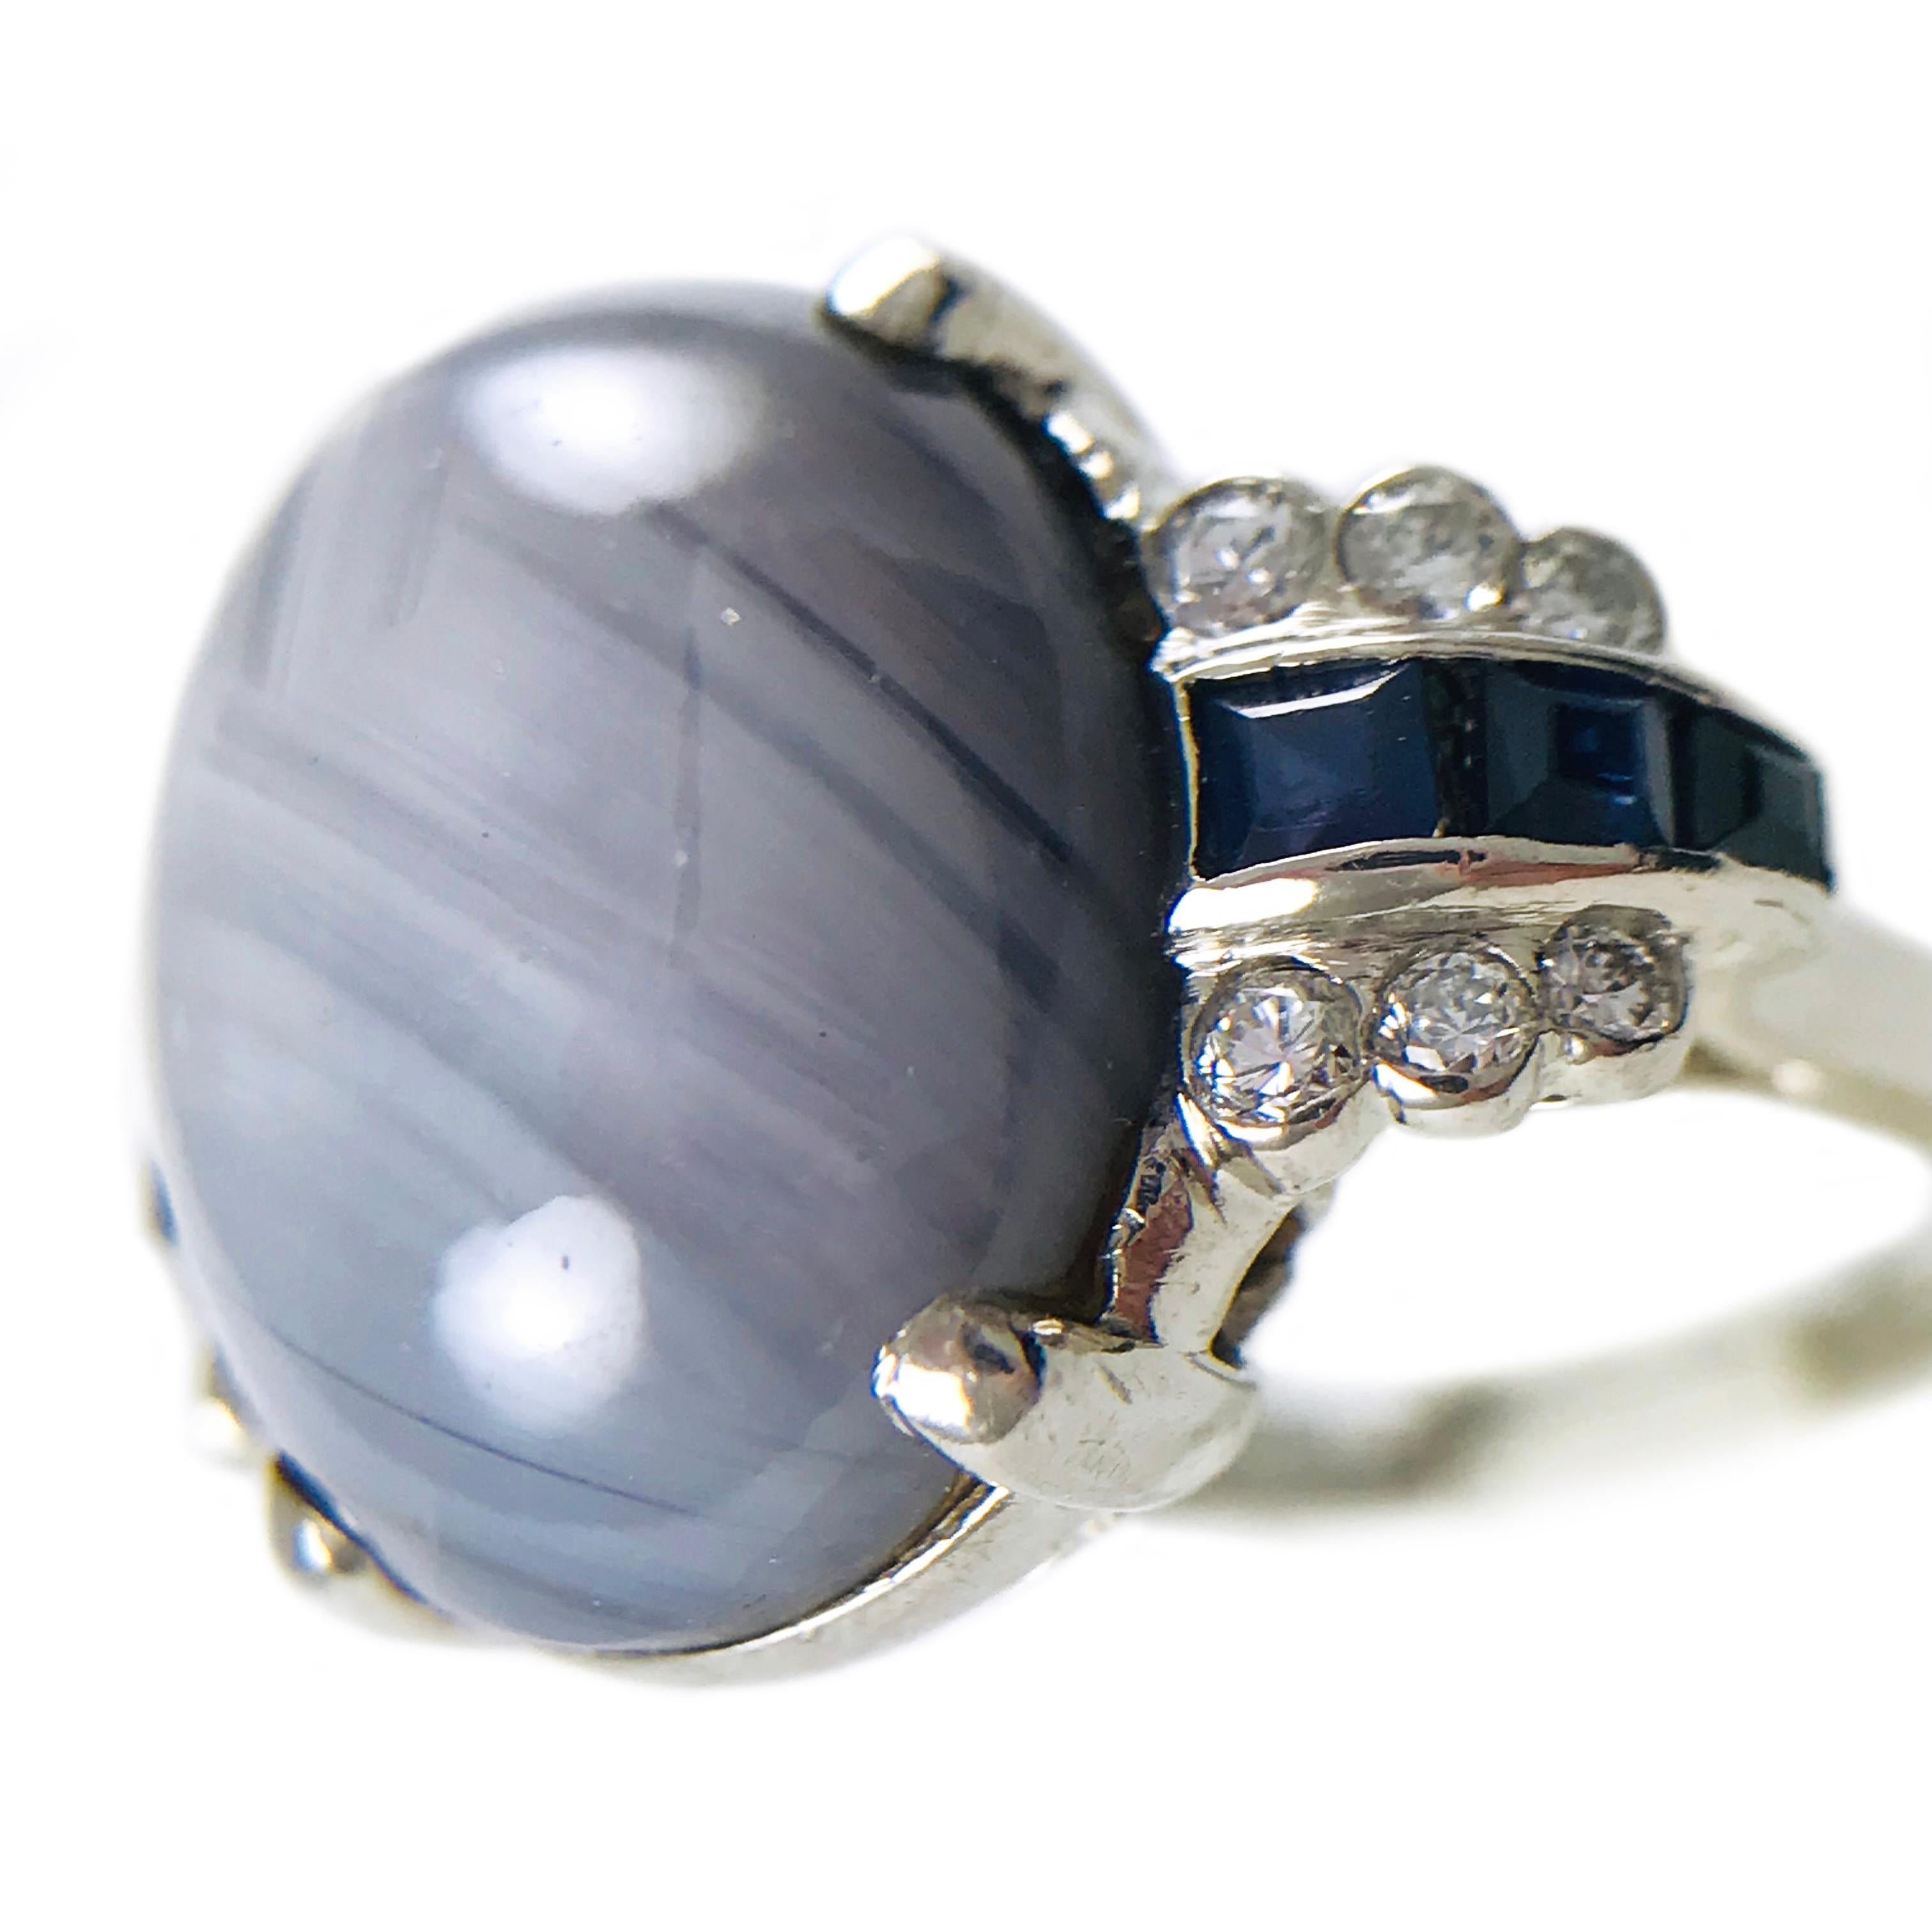 Vintage Platinum Star Sapphire Diamond Ring. Natural Star Sapphire Cabochon is 14.0mm x 12.5mm x 10.0mm, four prong set. The star has an excellent presence with light (see last photo). Ornate basket, airline and shoulders in true Art Deco style.